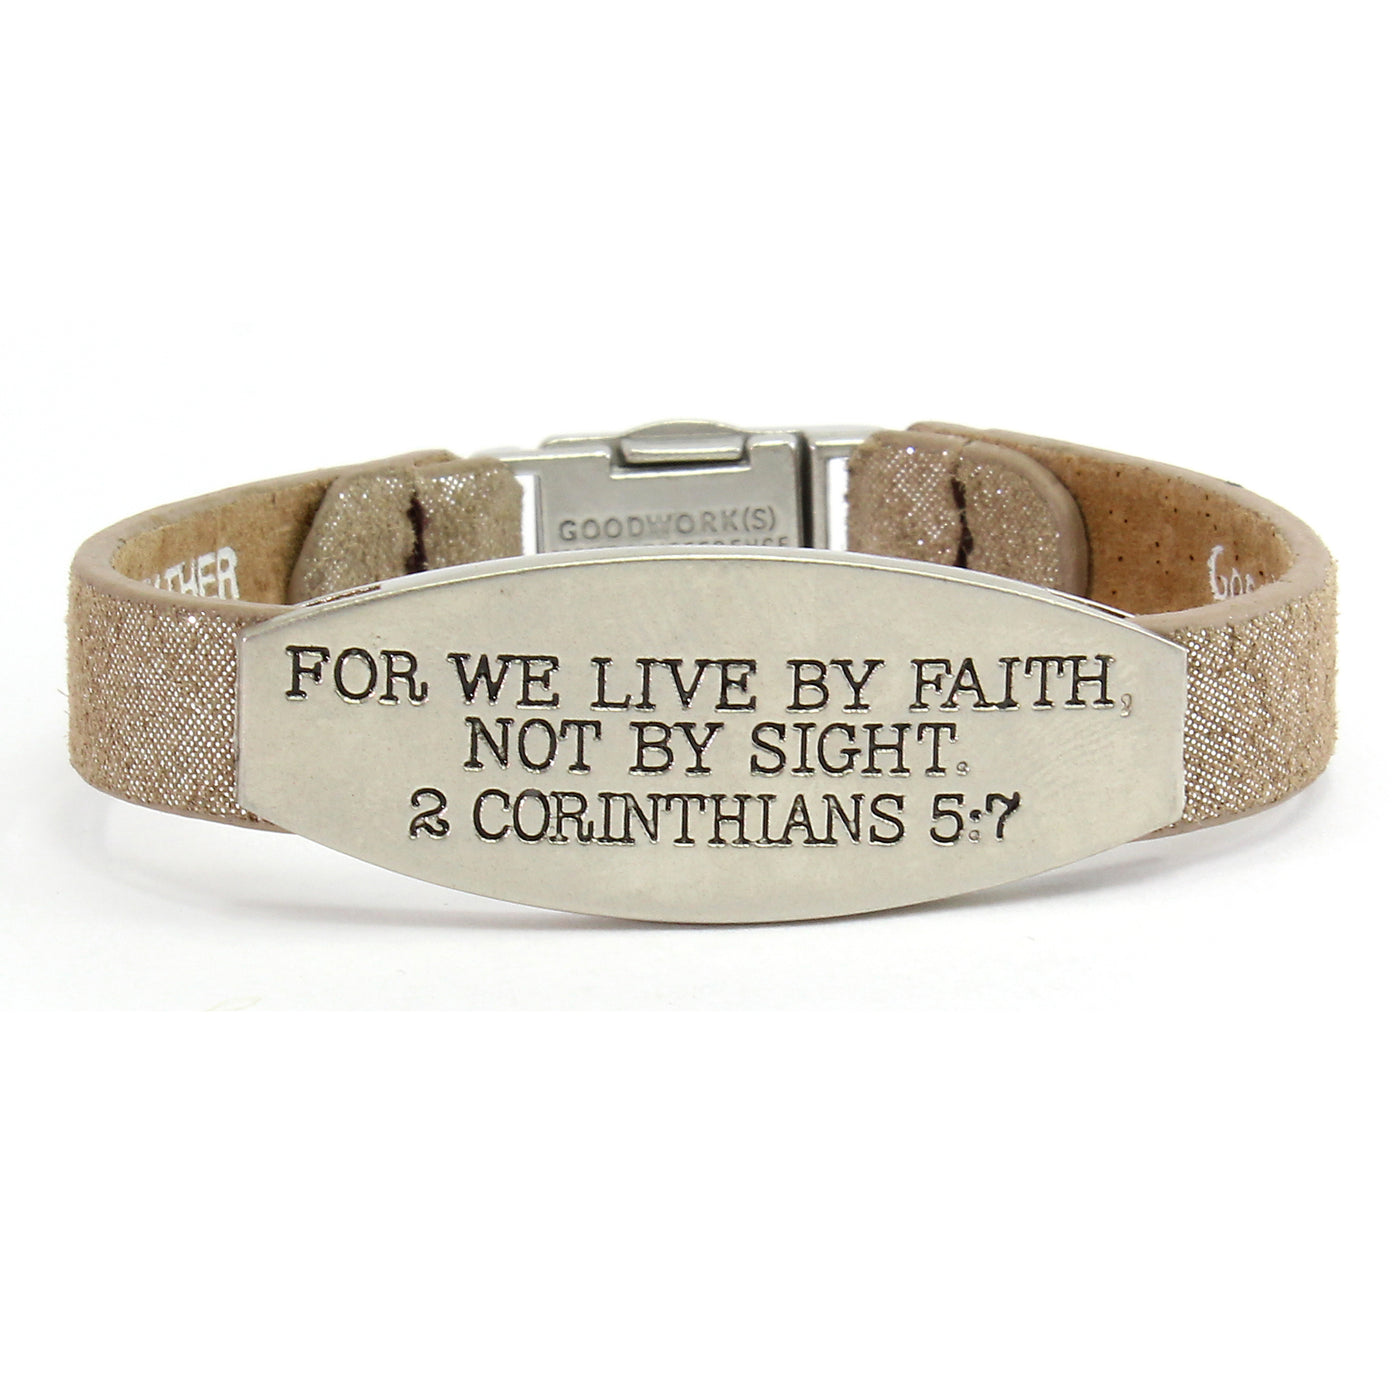 Peace Bible Verse Singles Starlite Bracelet-Good Work(s) Make A Difference® | Christian and Inspirational Jewelry Company in Vernon, California